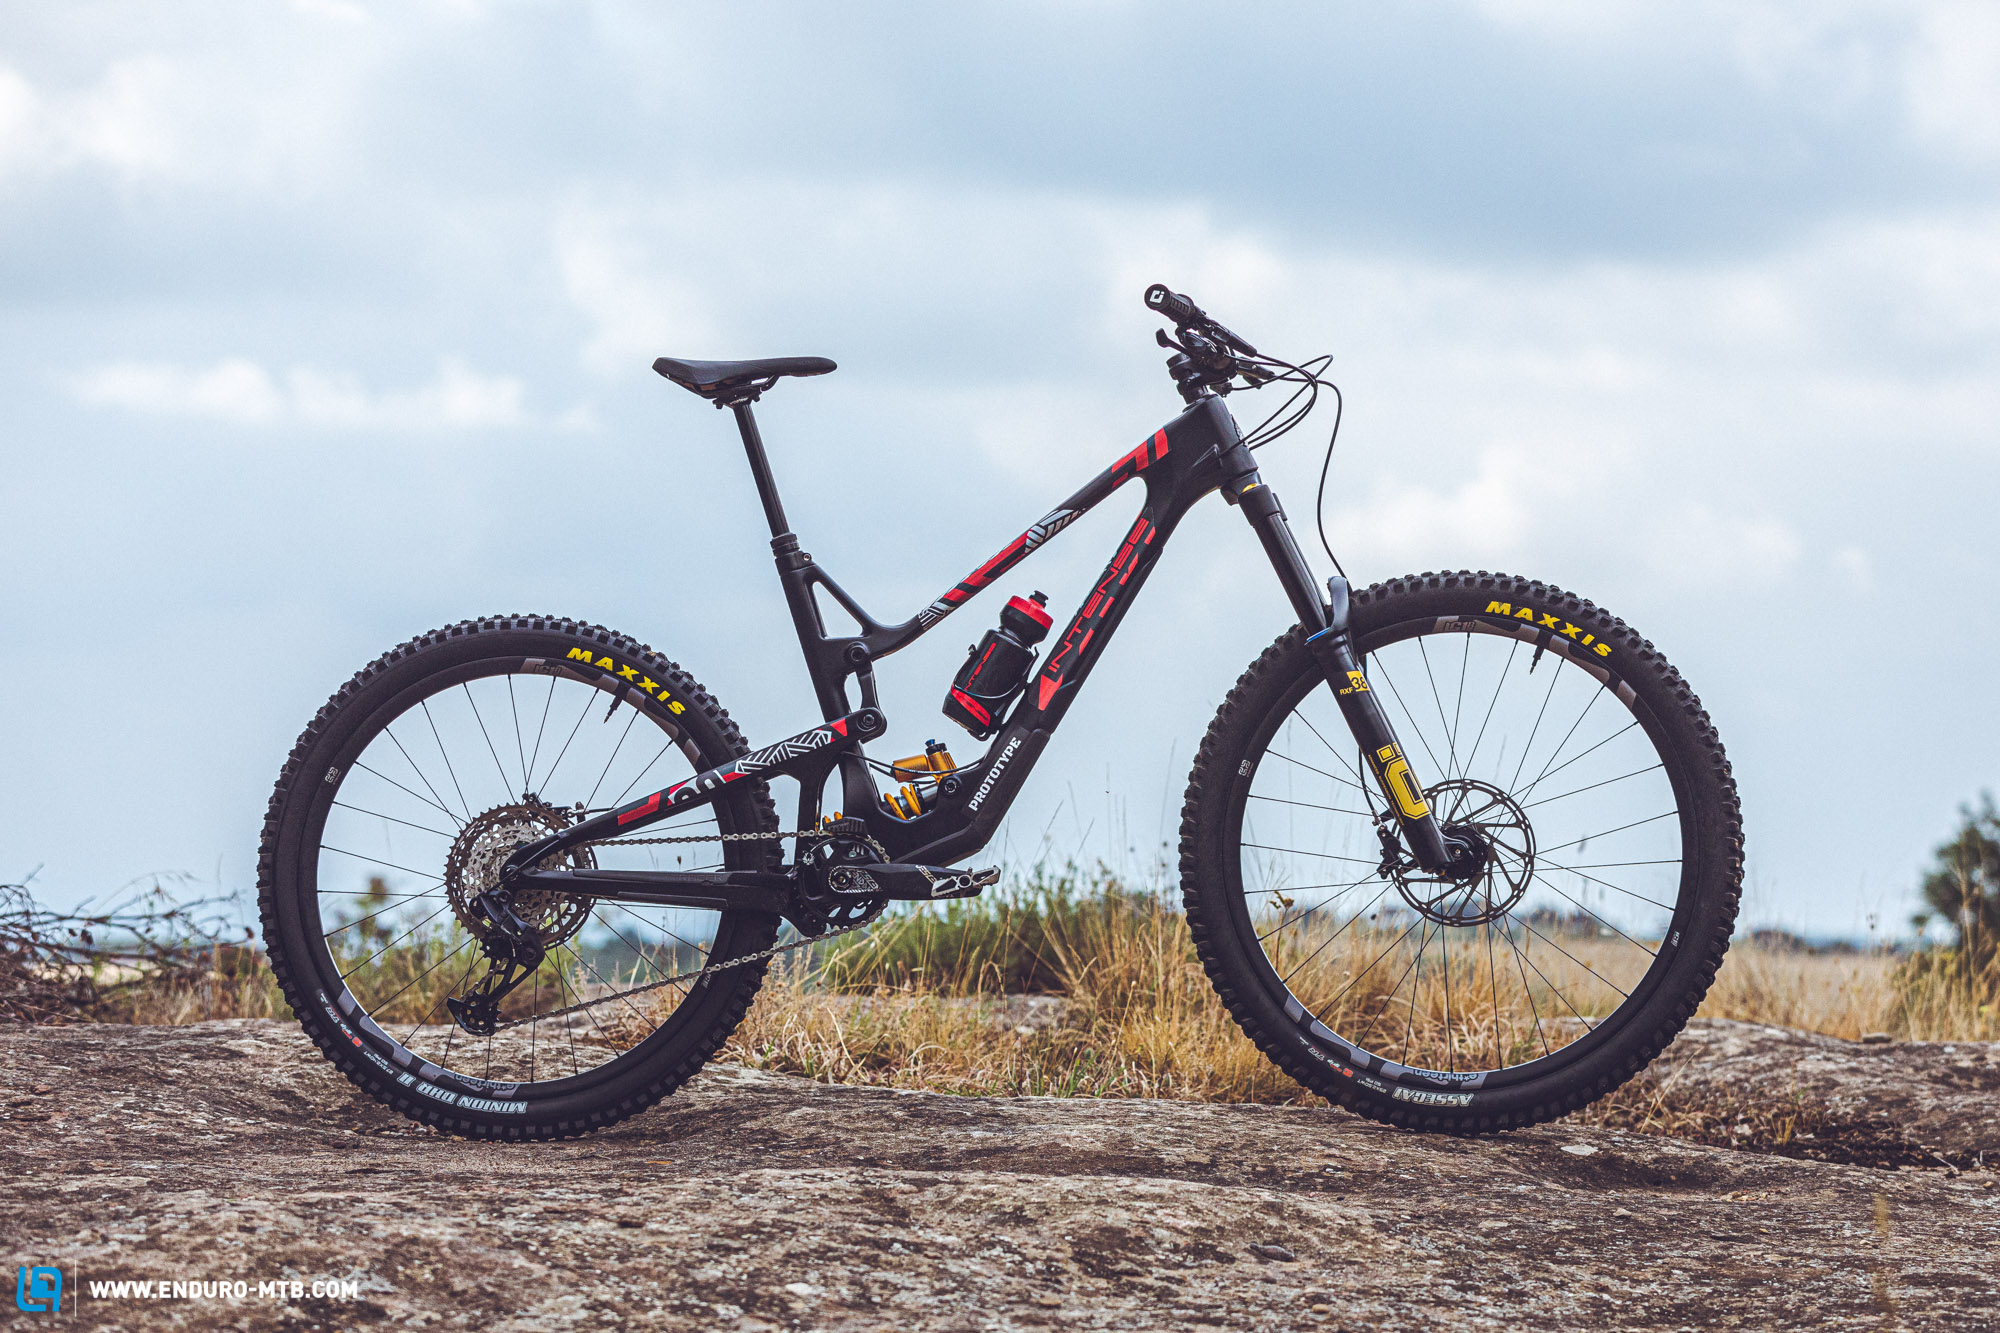 The new Intense Tracer 279 2022 – When are Intense going to launch their new enduro bike?